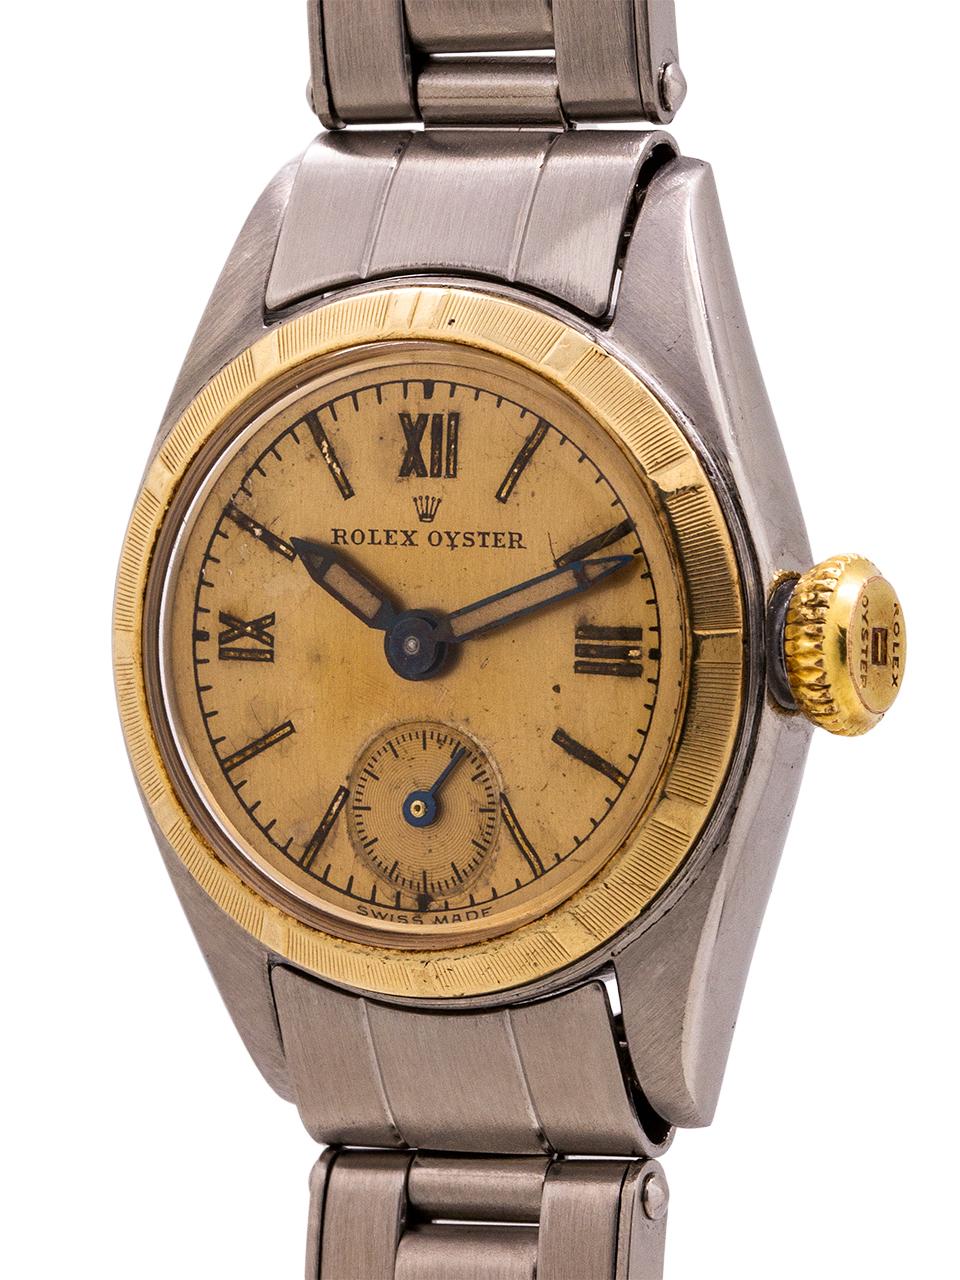 Lady Rolex Oyster 14 Karat Yellow Gold and Stainless Steel Manual Wind im Zustand „Hervorragend“ in West Hollywood, CA